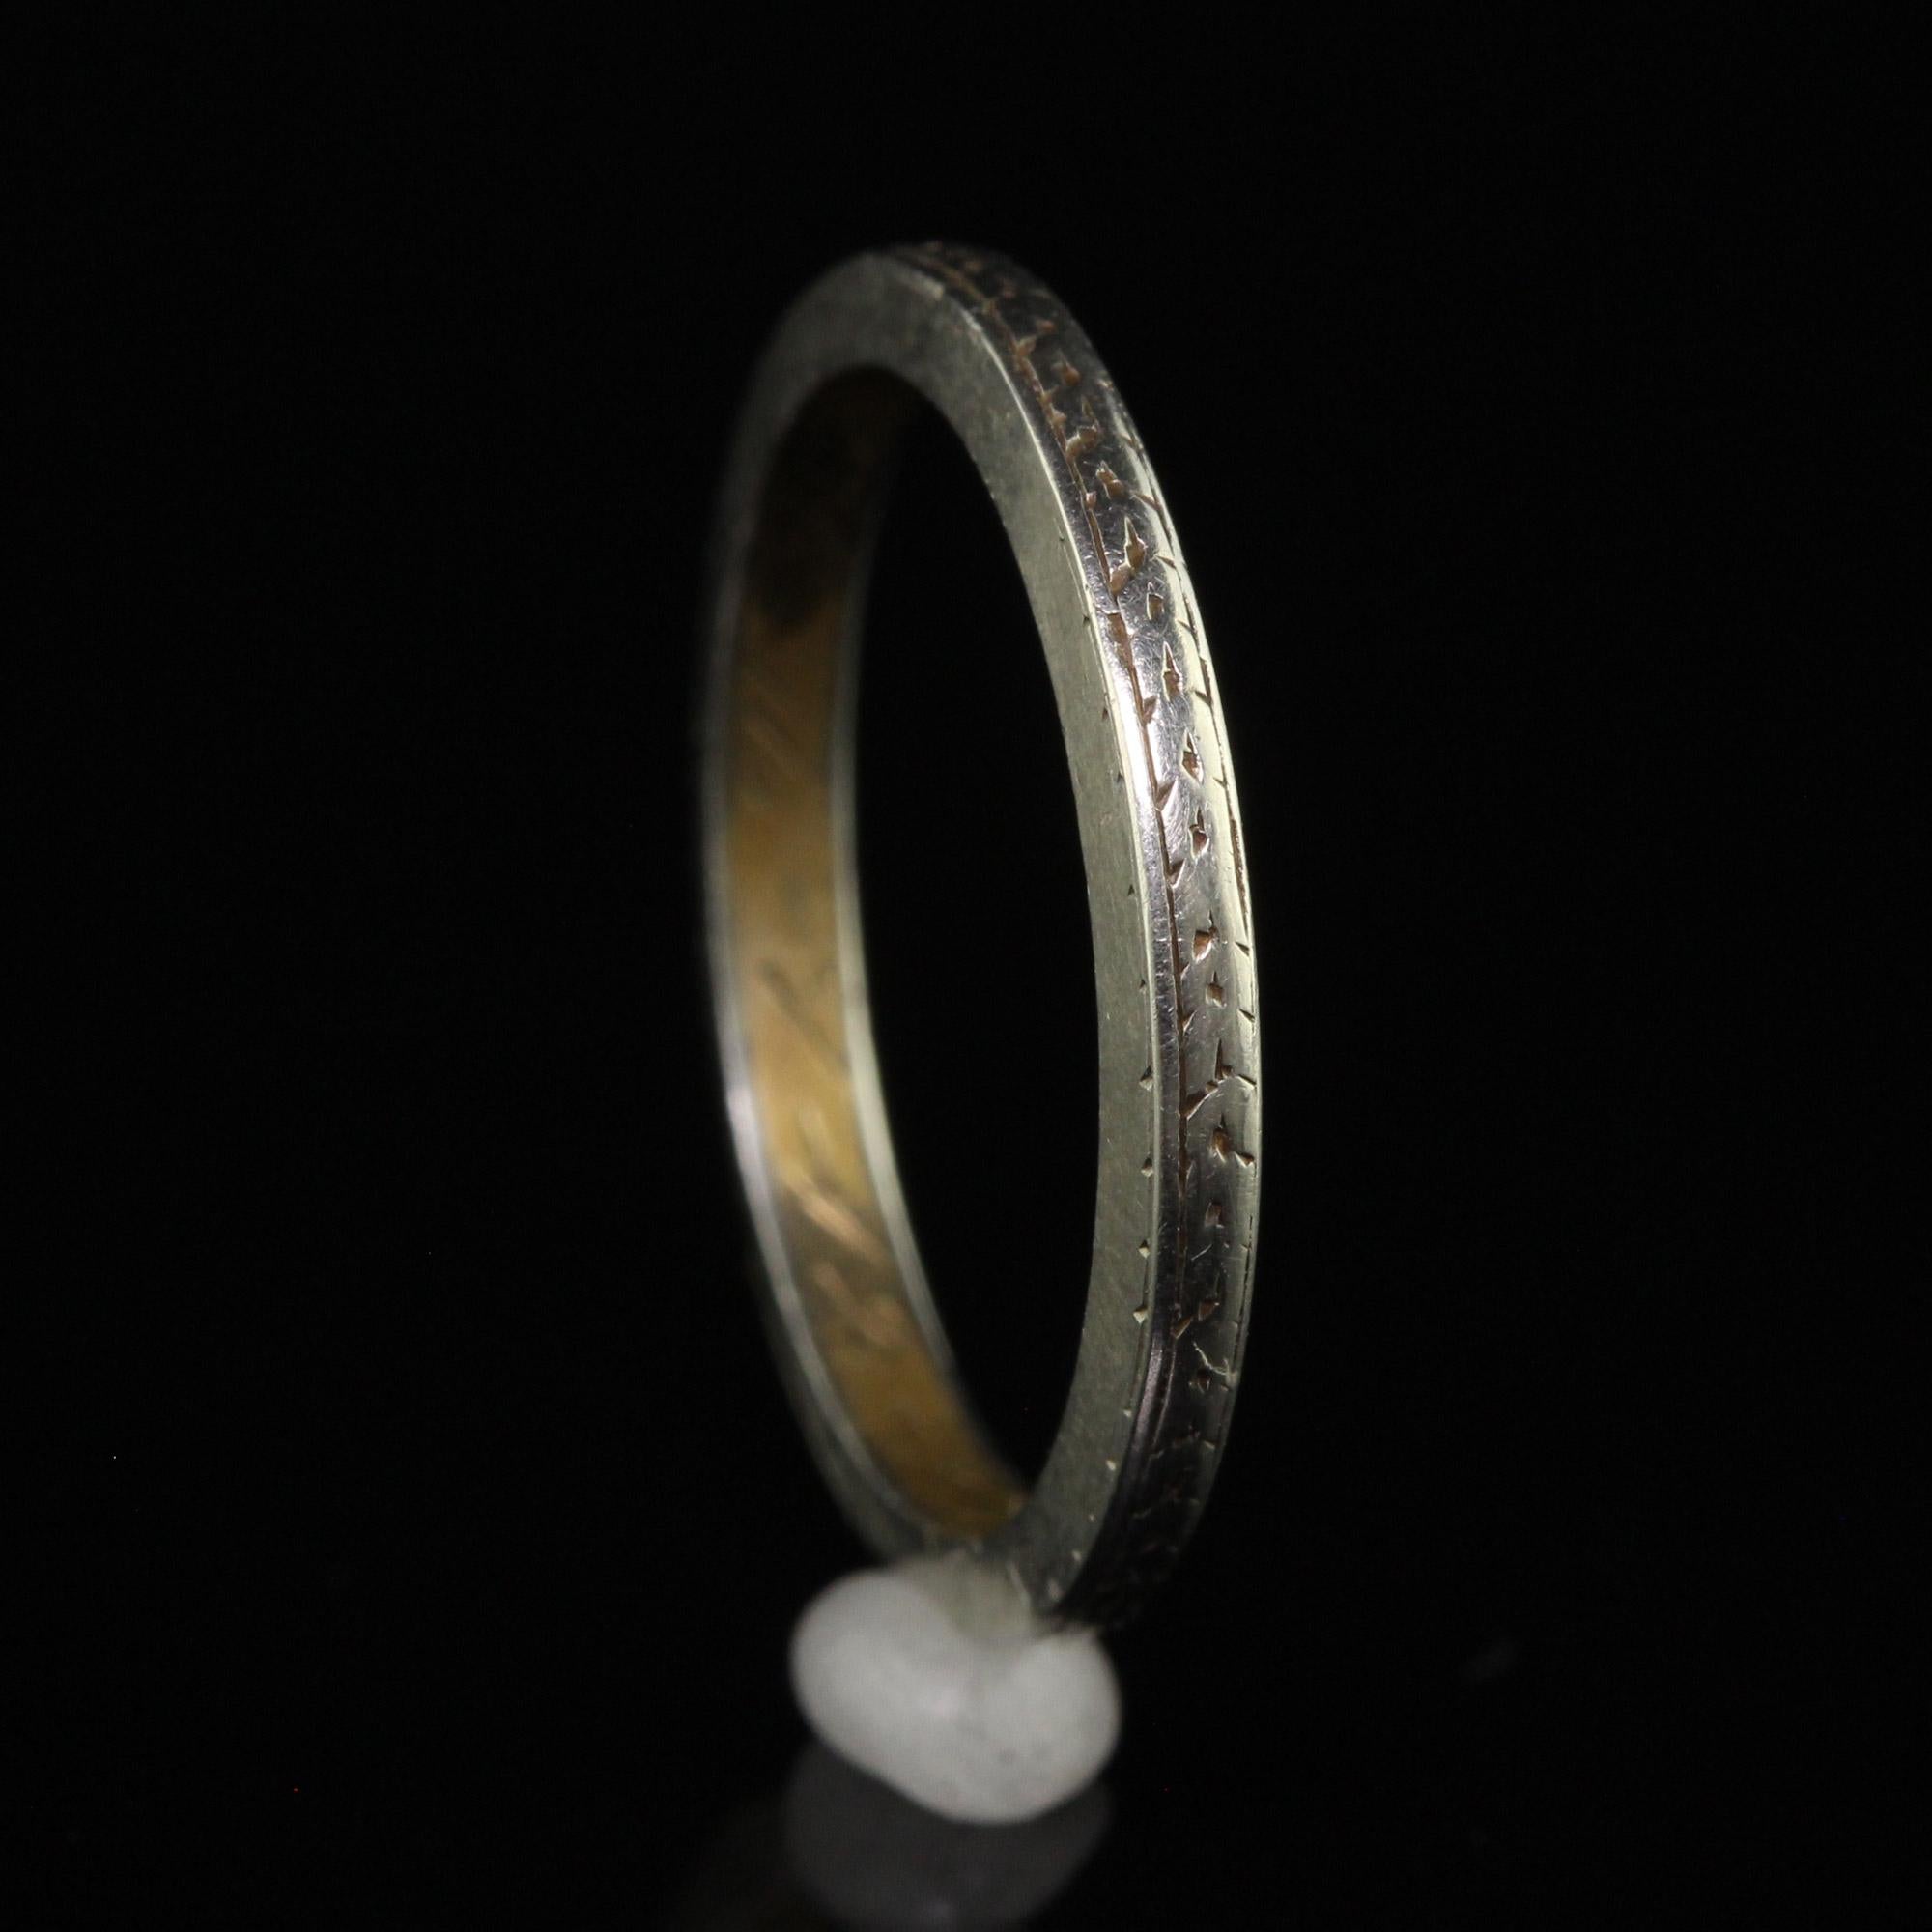 Antique Art Deco 18K White Gold Two Tone Engraved Wedding Band - Size 4 1/2 For Sale 2